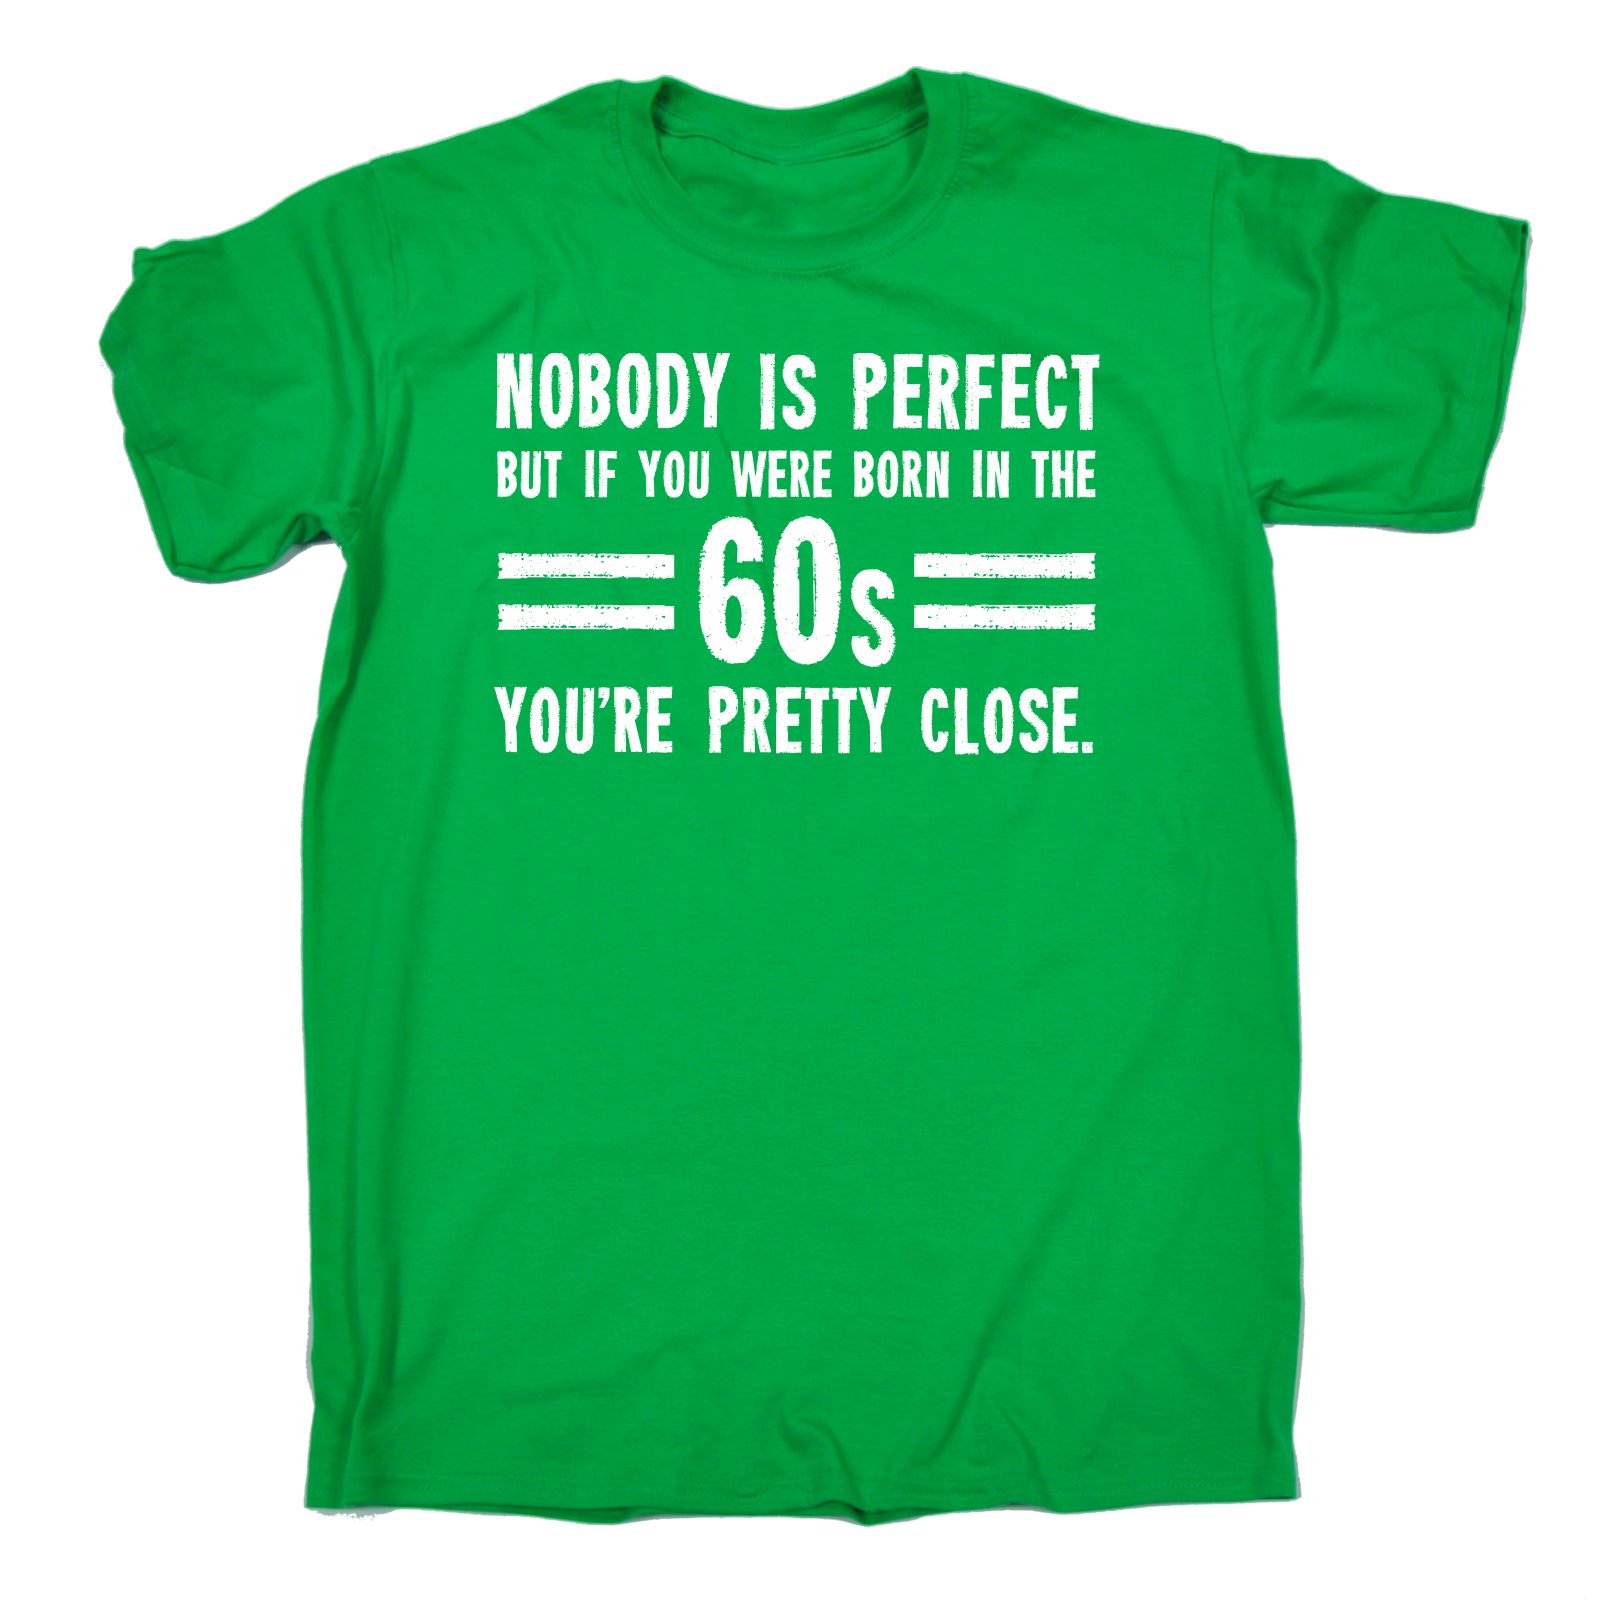 Nobody Is Perfect Born In The 60s Youre Pretty Close MENS T-SHIRT tee birthday